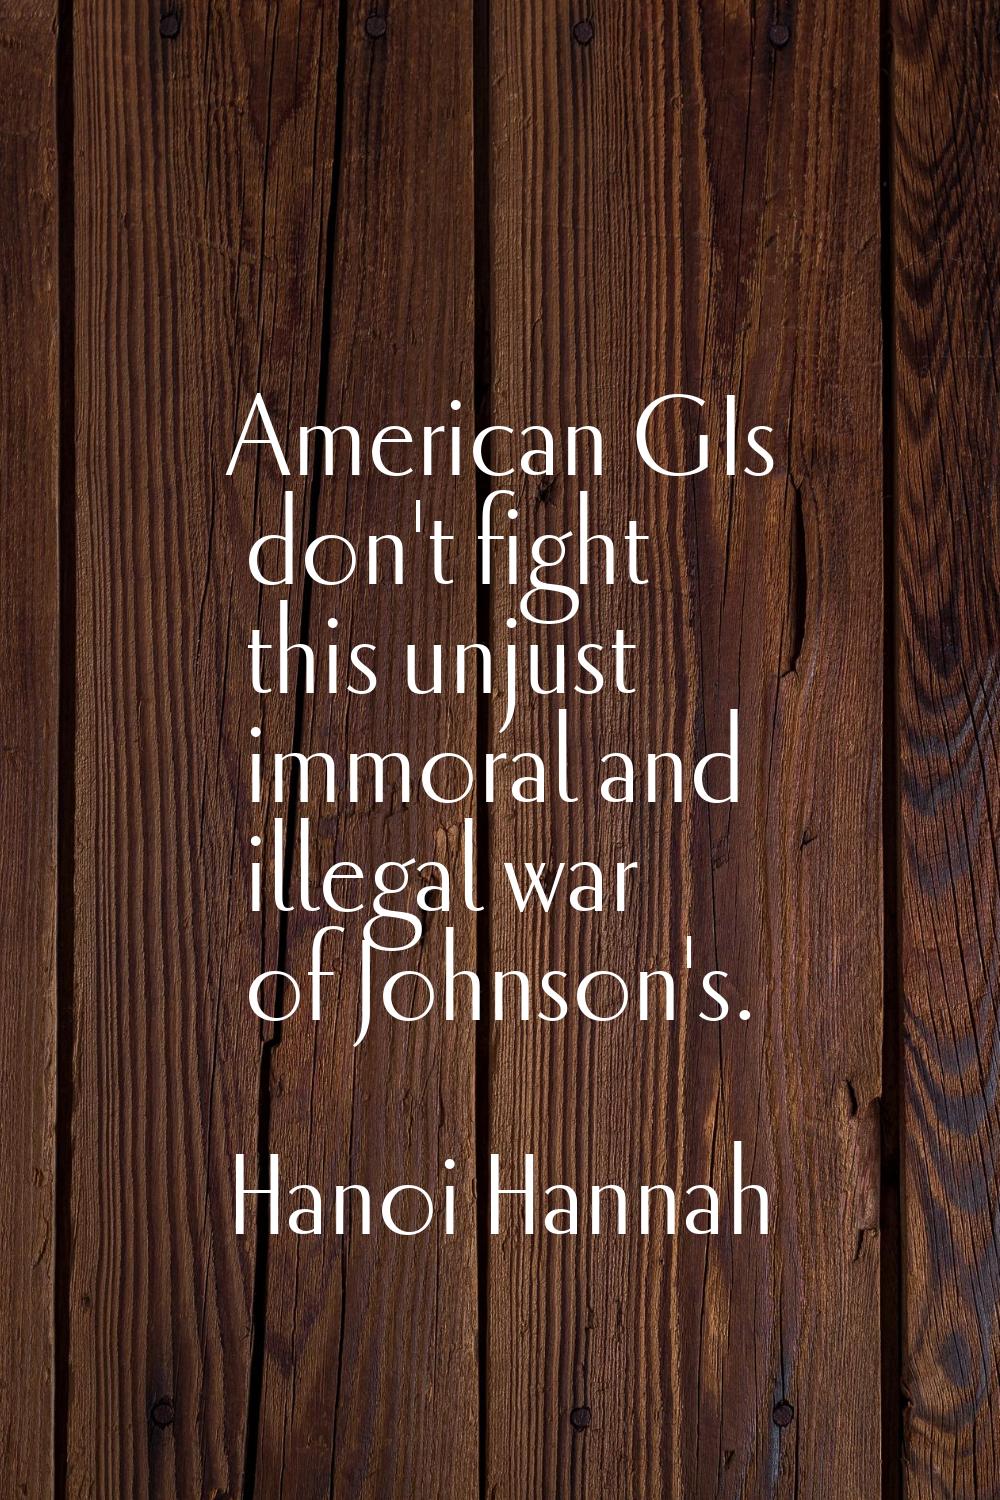 American GIs don't fight this unjust immoral and illegal war of Johnson's.